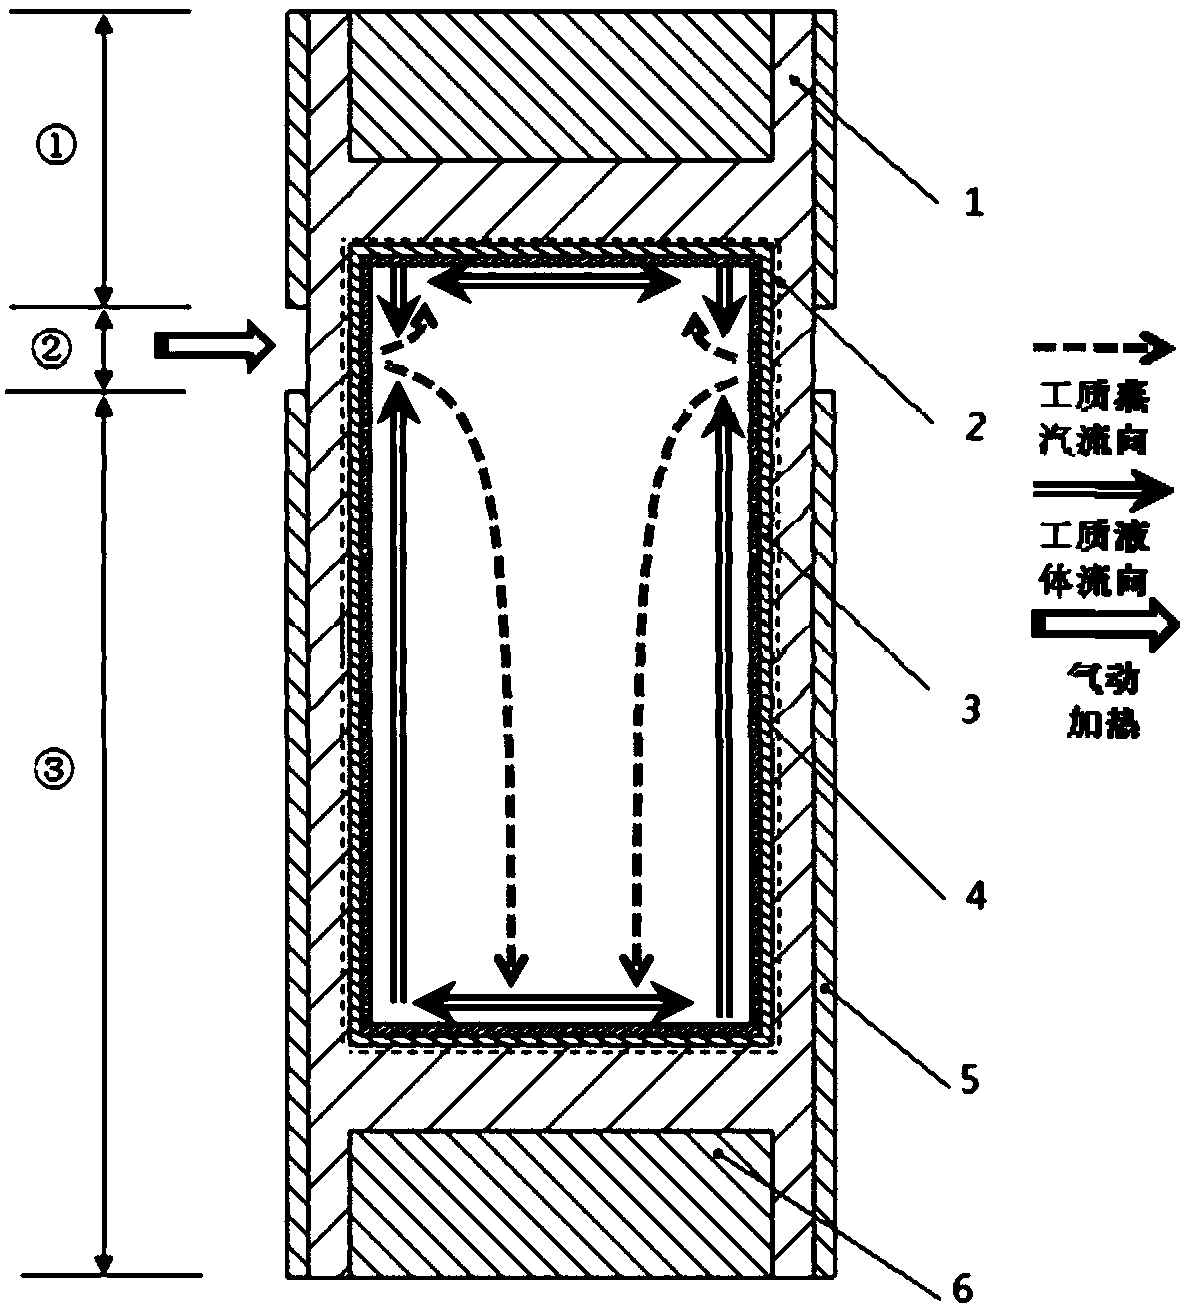 A heat-proof structure of a hypersonic vehicle dredging rudder shaft